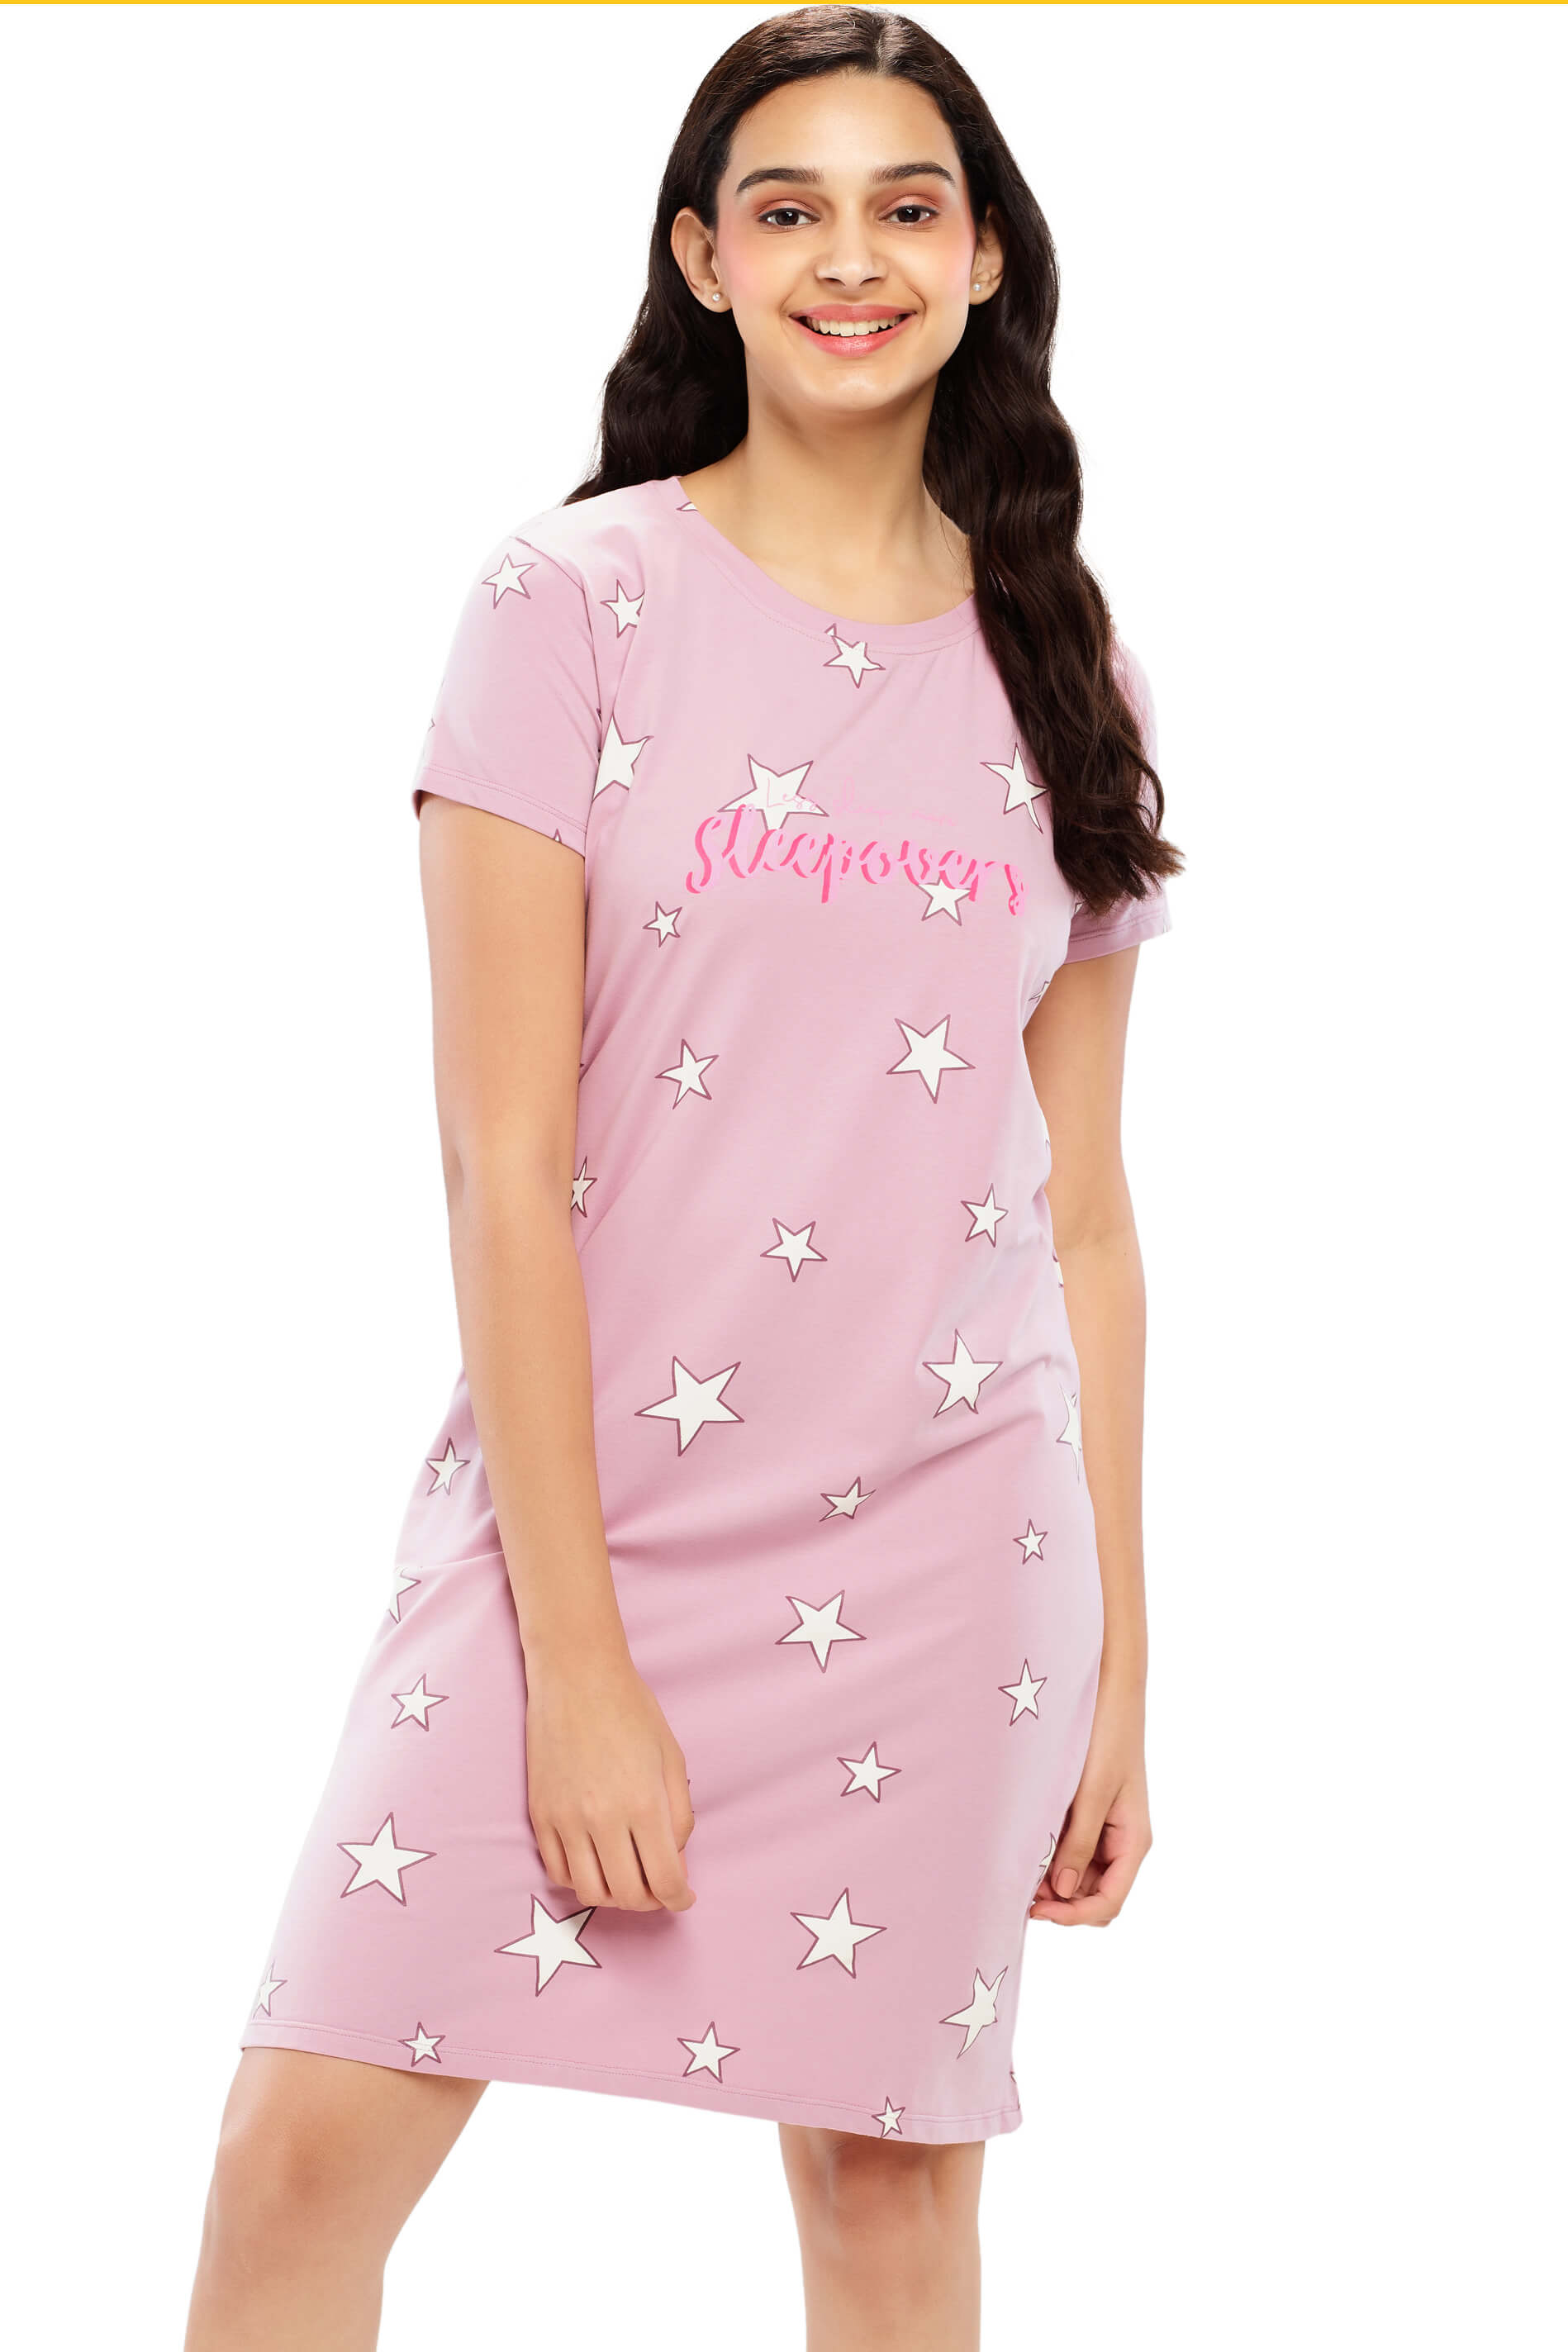 Girls Nightgown in White with Pink Ribbon Inlay – Classic Girl